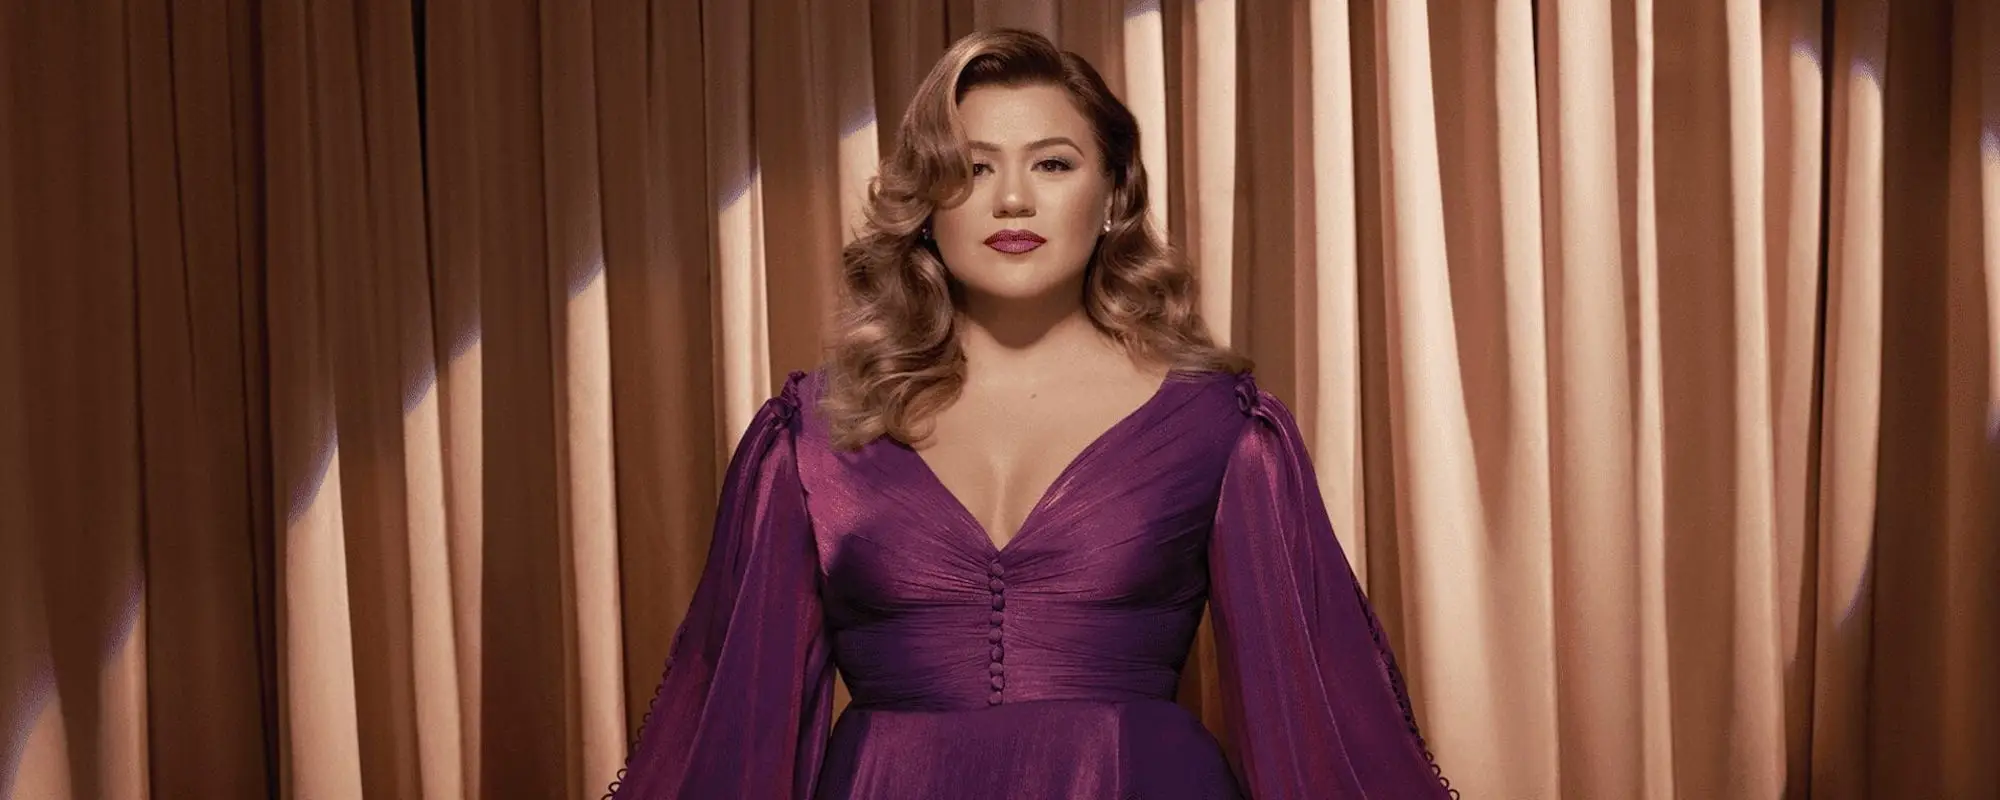 Kelly Clarkson Shares Details on New LP, Covers Blink-182 and The Staple Singers in Latest ‘Kellyoke’